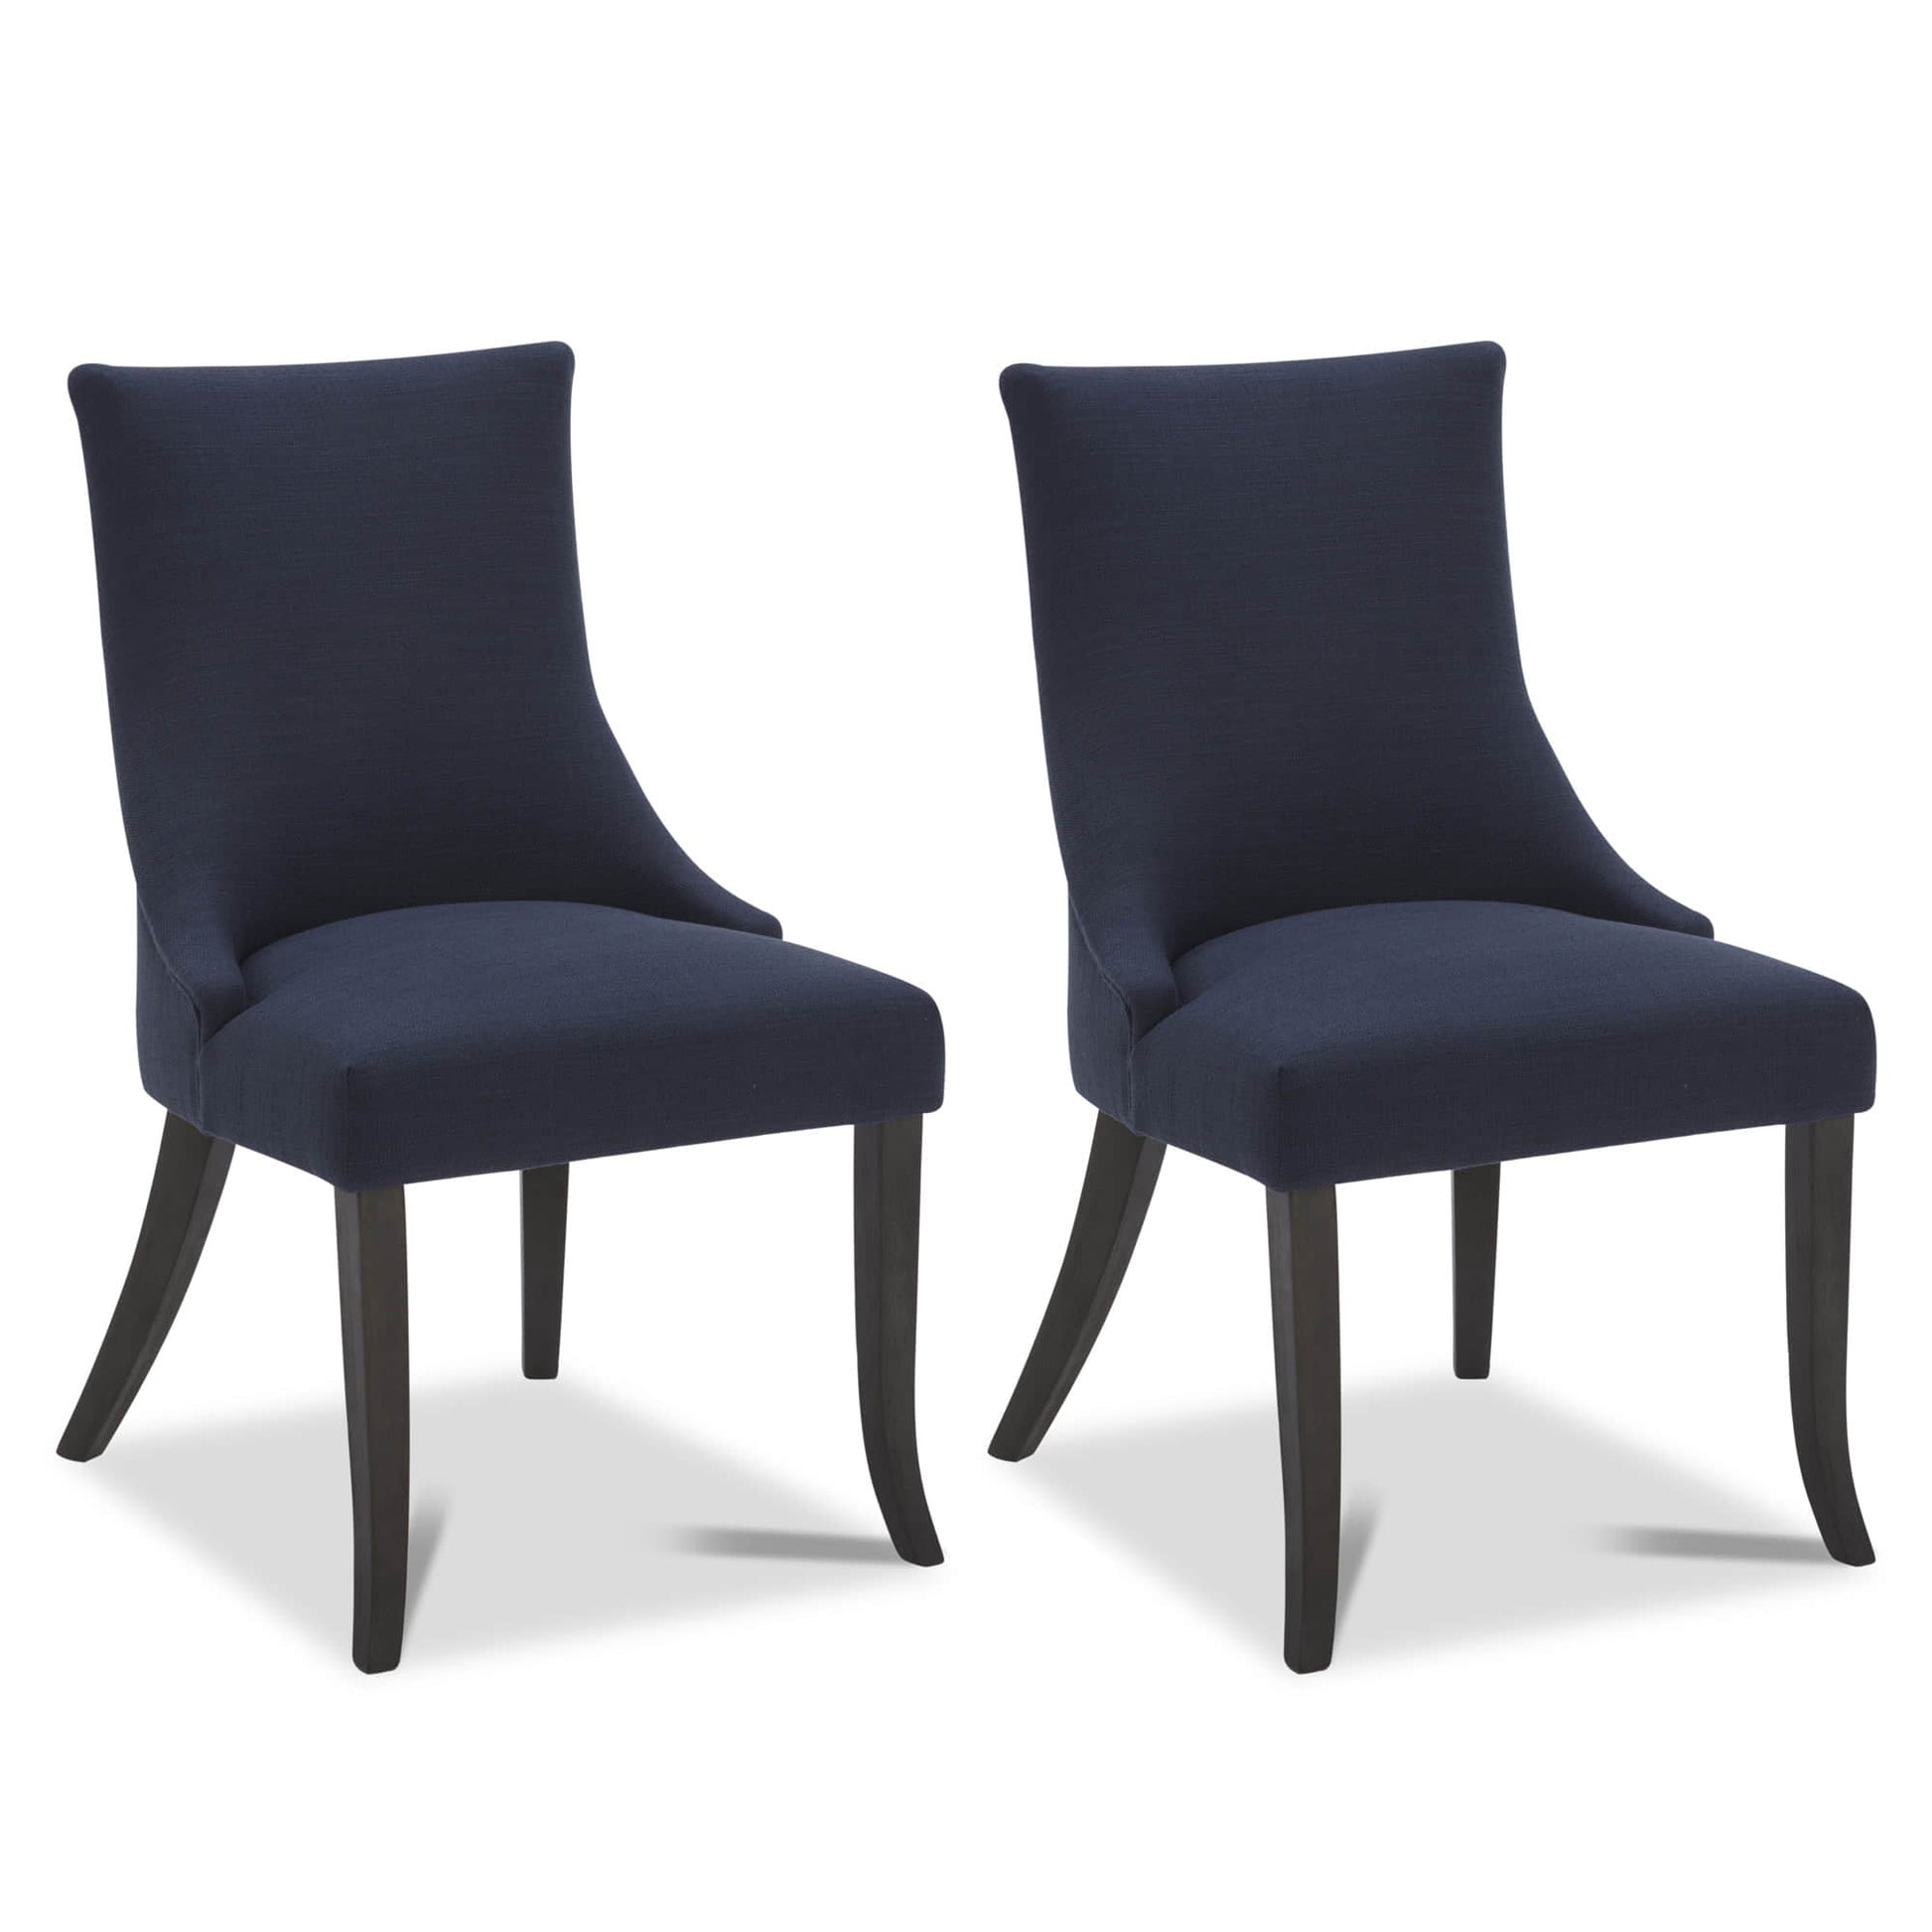 CHITA LIVING-Mia Romantic Dining Chair (Set of 2)-Dining Chairs-Fabric-Insignia Blue-